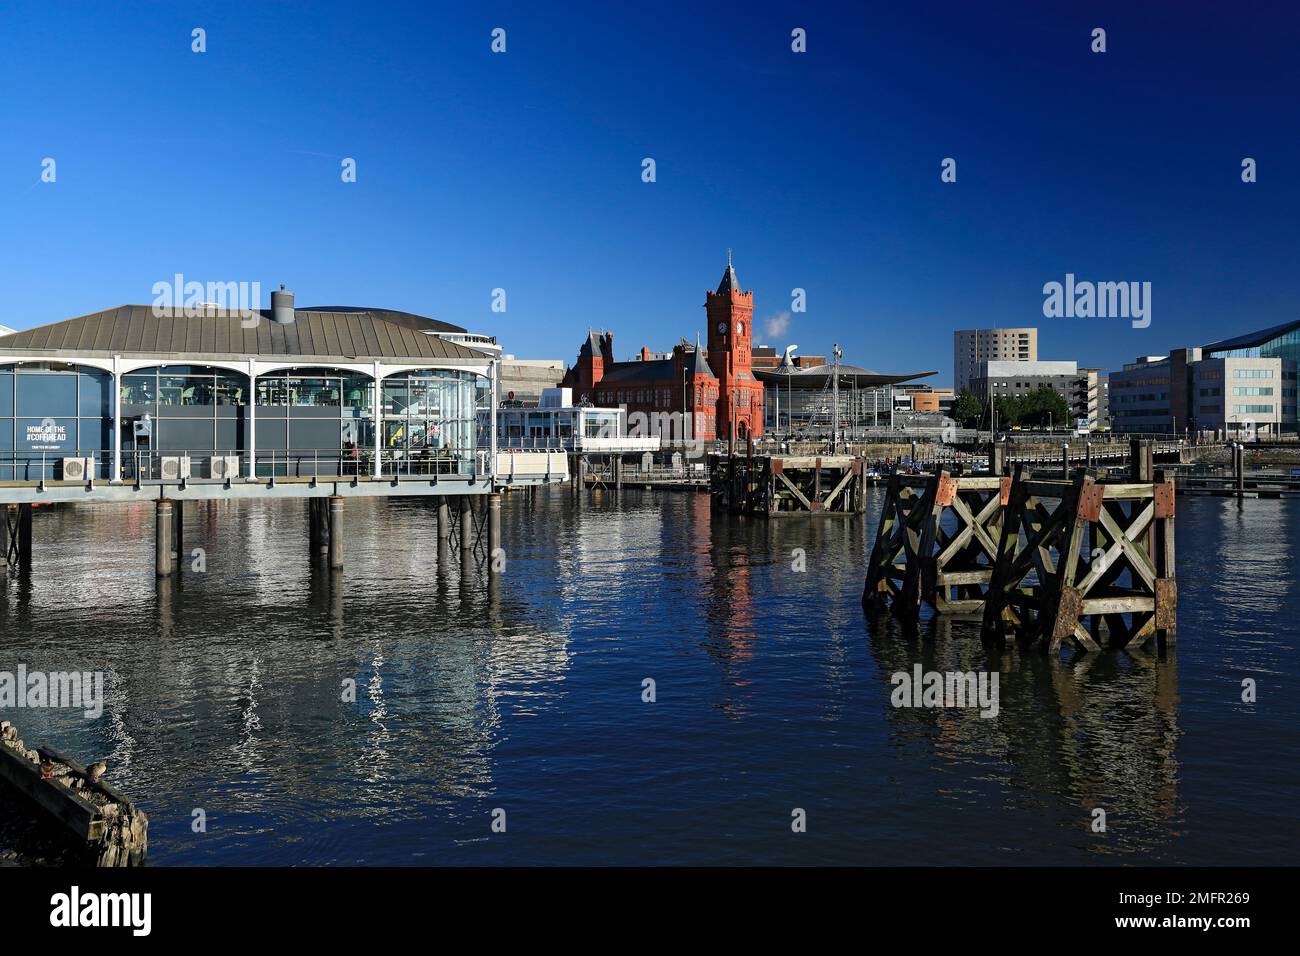 Victorian Pierhead Building Senedd Building and old wooden Dolphins, Cardiff Bay, Cardiff, Wales, UK. Stock Photo